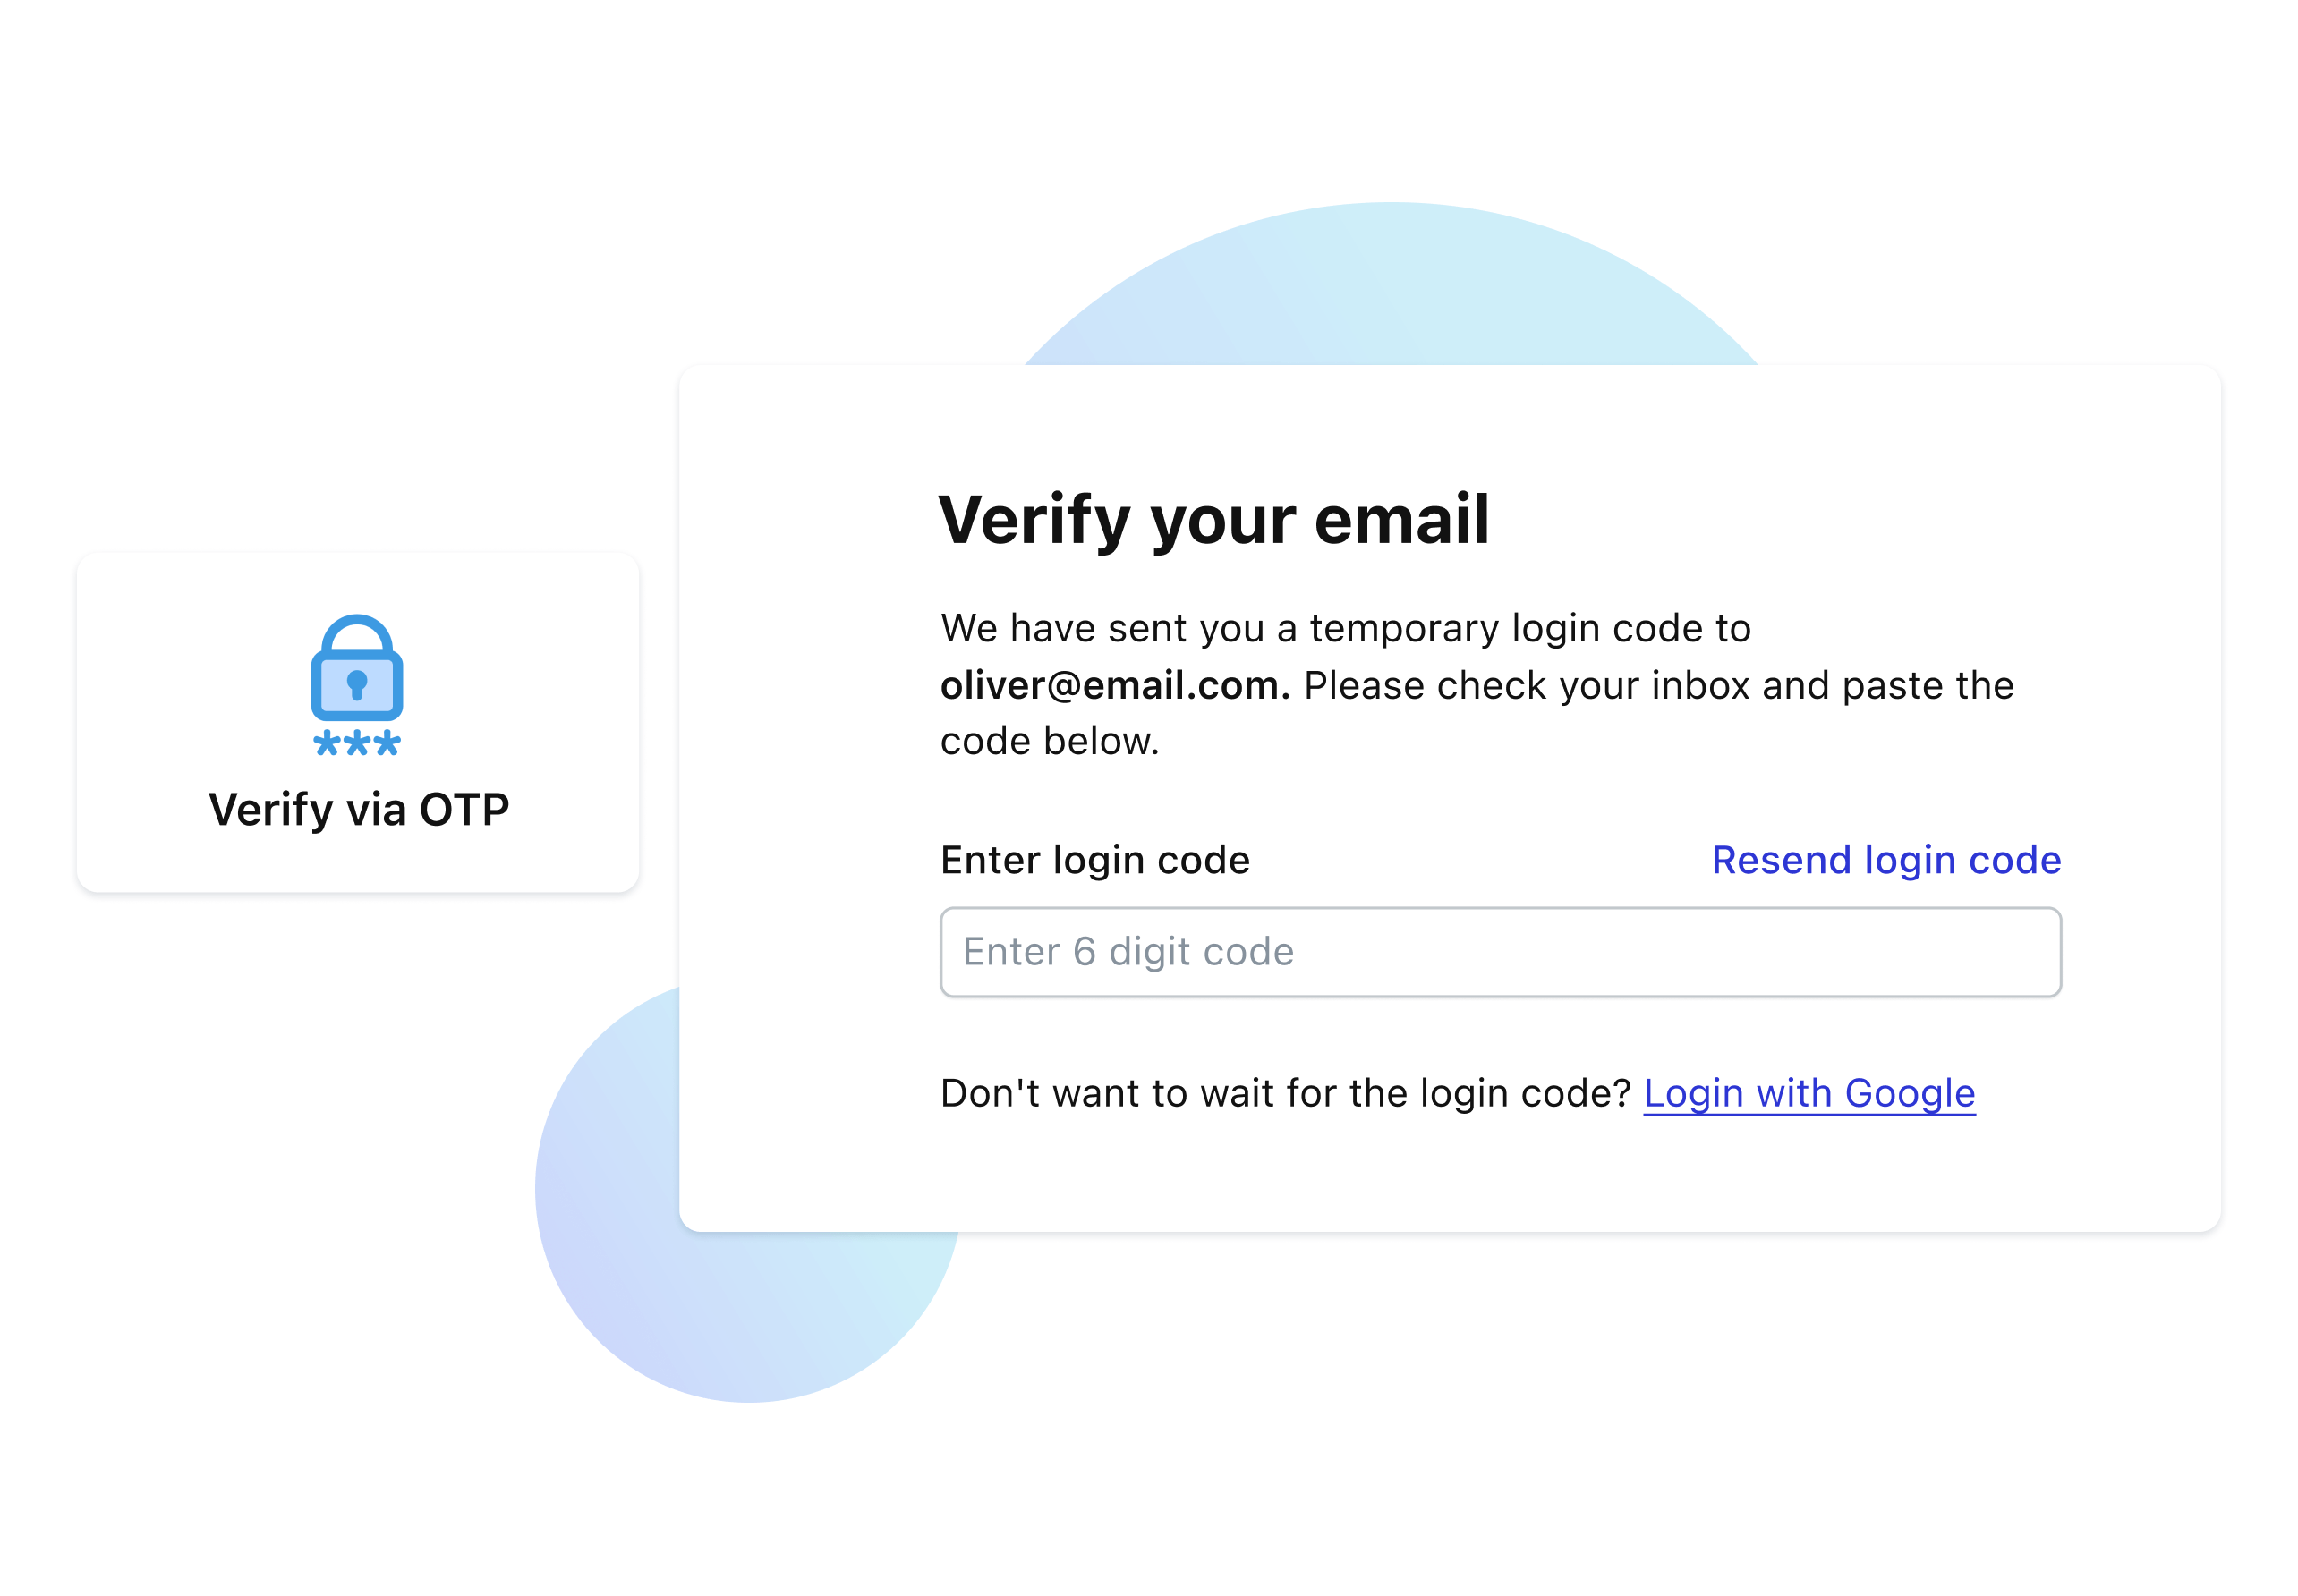 Email verification using OTP